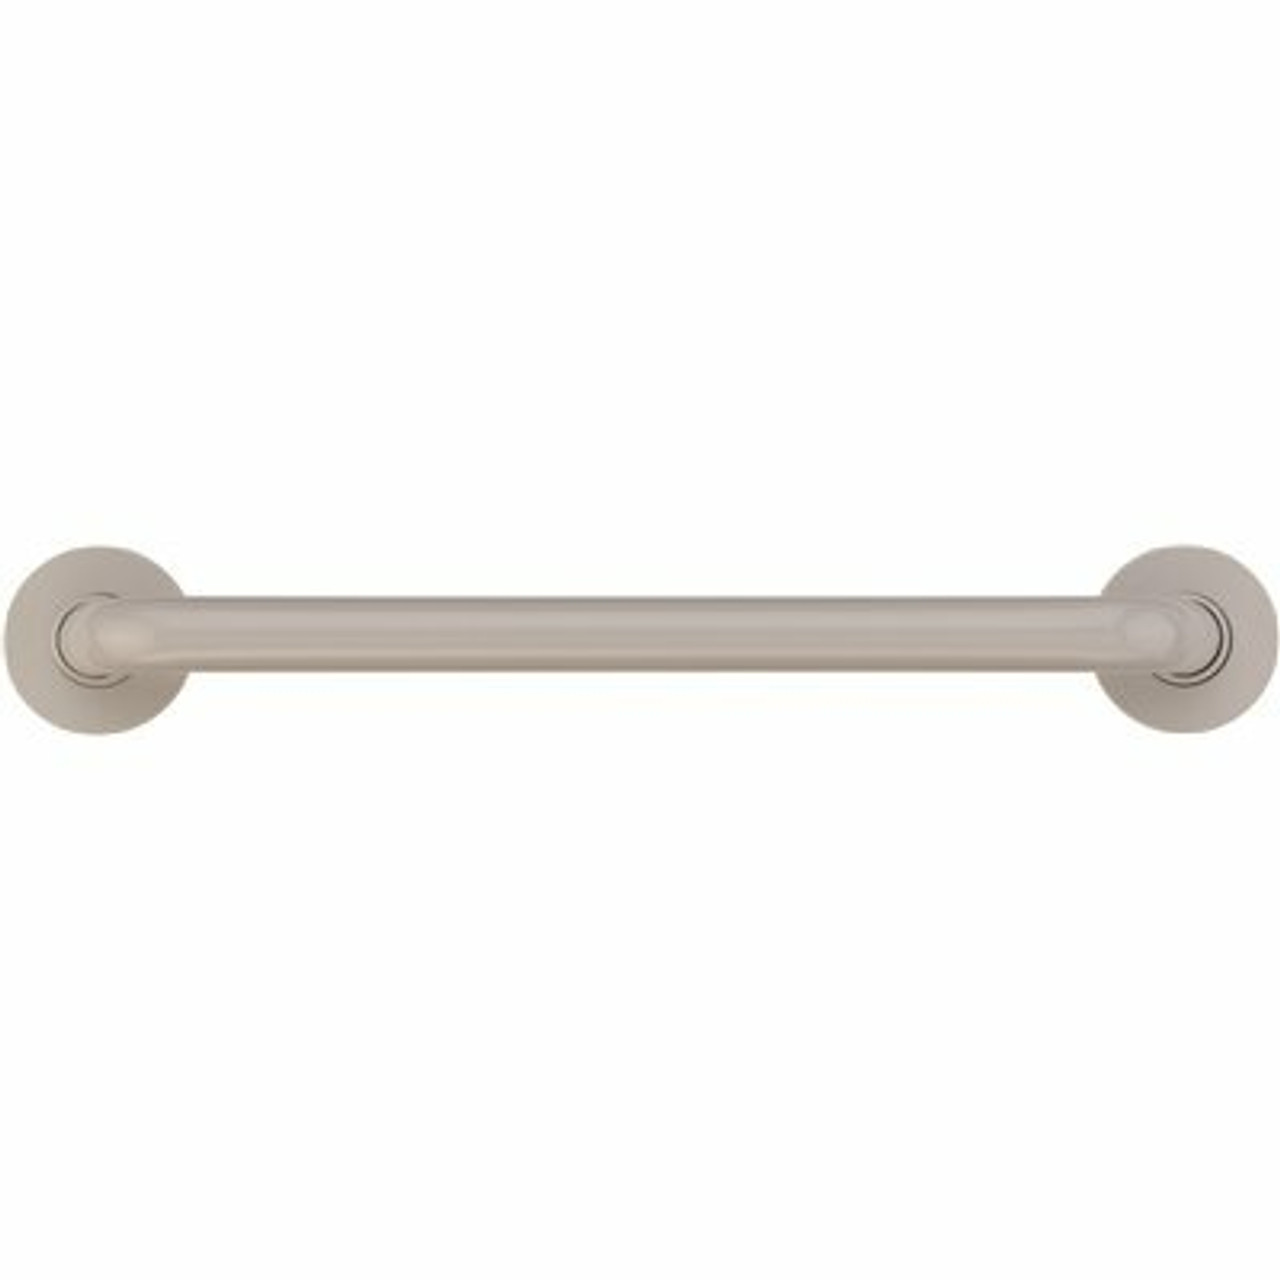 Ponte Giulio Usa 42 In. Contractor Antimicrobial Vinyl Coated Grab Bar In Light Gray